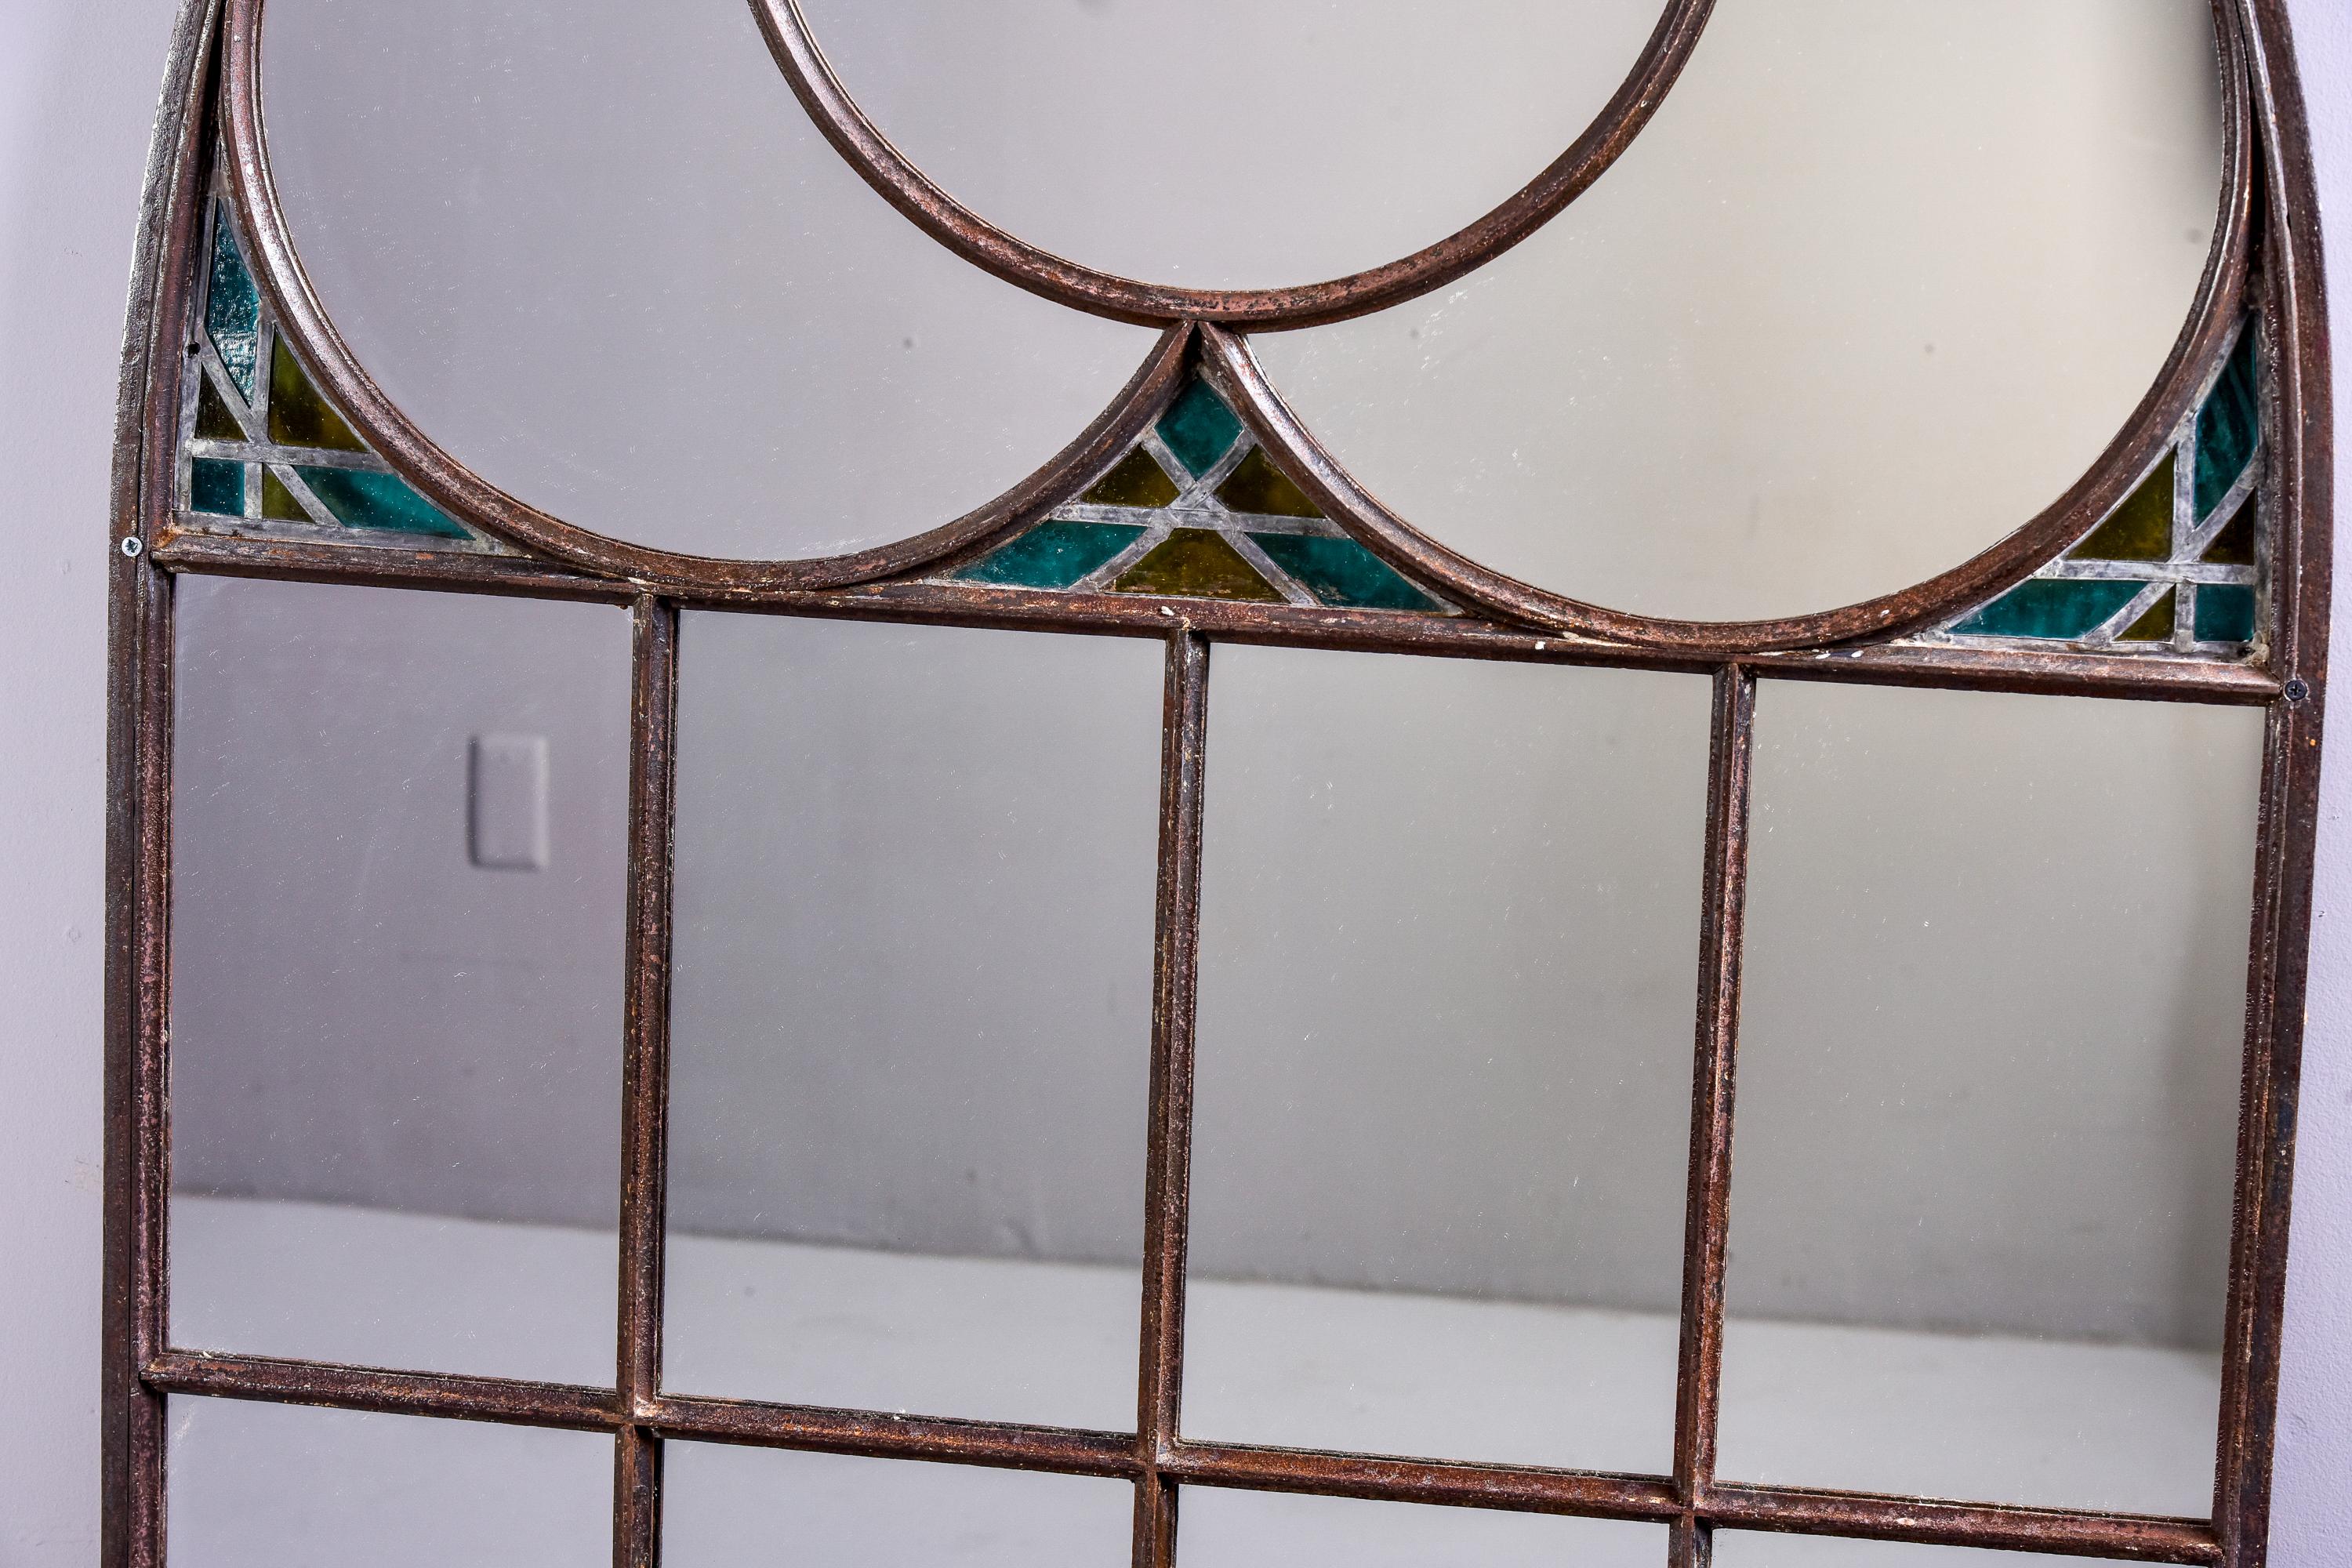 Large Late 19th C Iron Framed Church Window Mirror with Stained Glass In Good Condition For Sale In Troy, MI